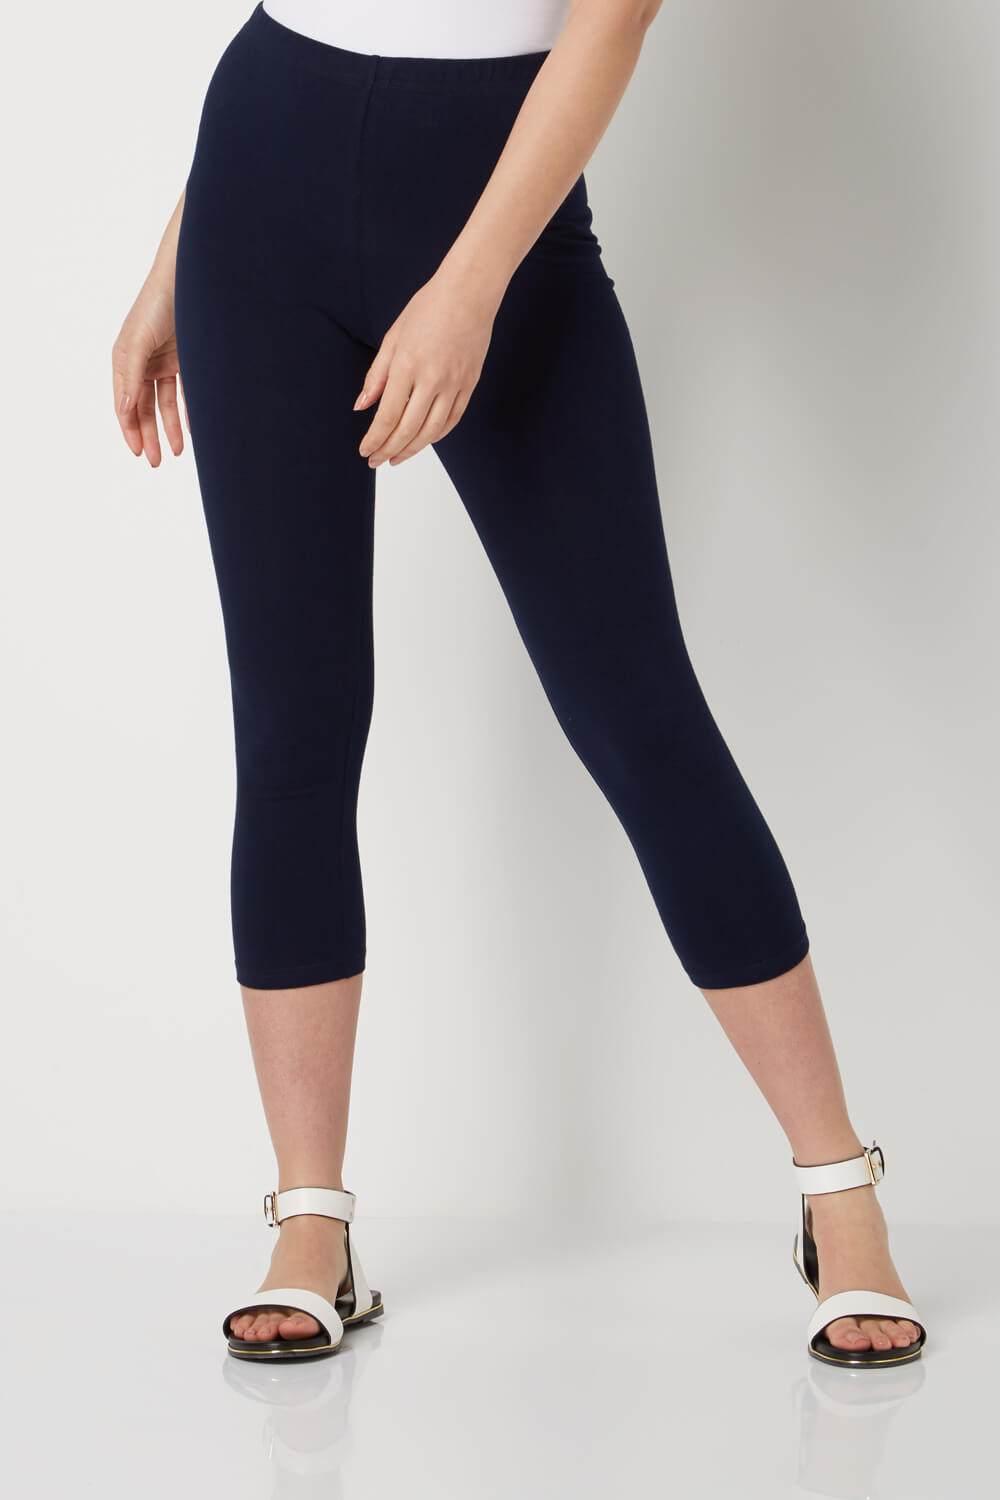 best plus size high waisted jeans